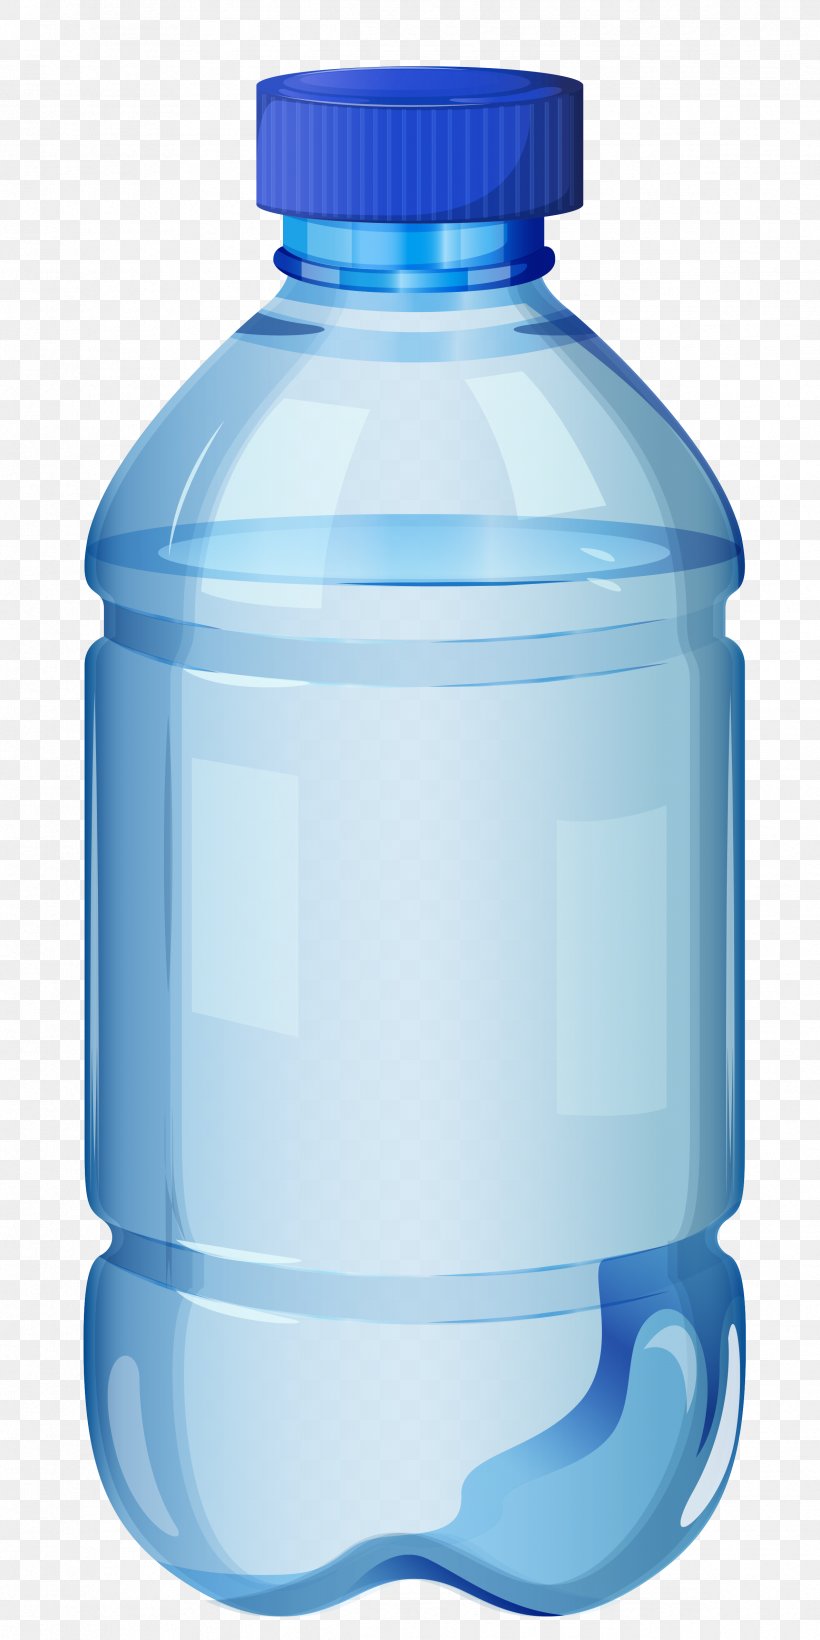 Water Bottle Bottled Water Clip Art, PNG, 2376x4752px, Water Bottle, Beer Bottle, Bottle, Bottled Water, Distilled Water Download Free